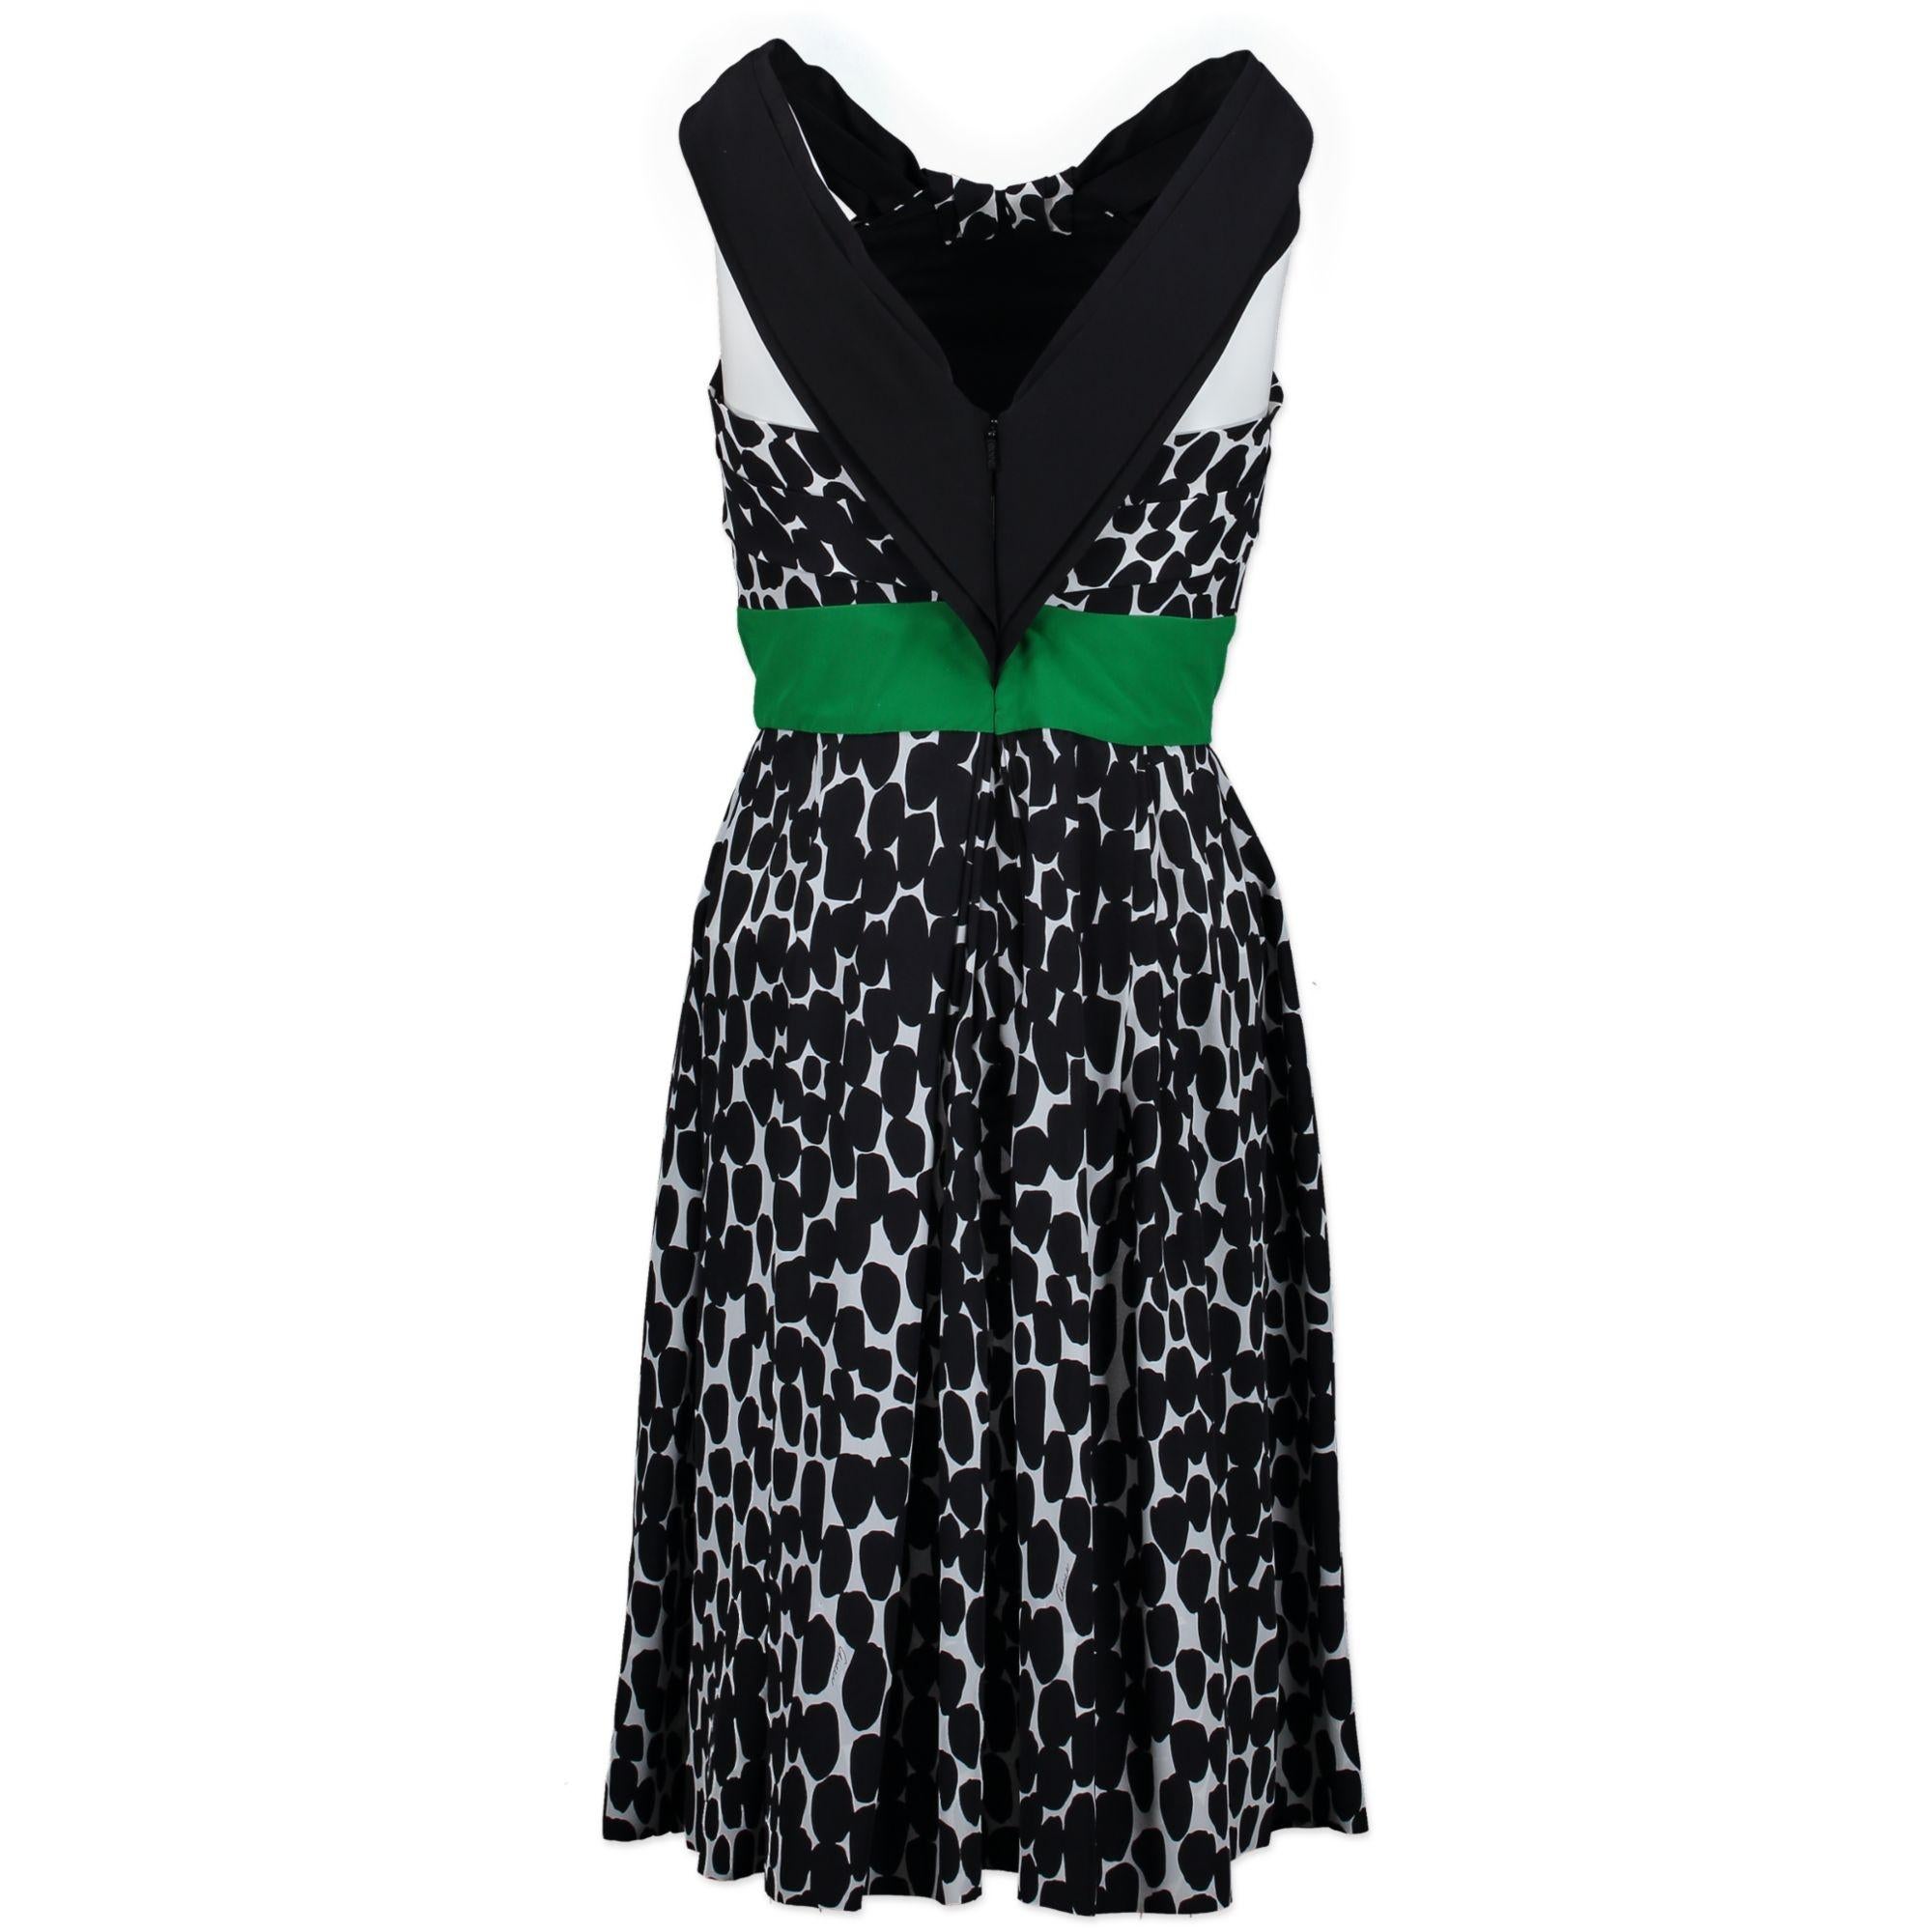 In excellent condition

Gucci 100% silk dress - size 38

This midi silk dress is perfect for a summer party or lunch/dinner. Featuring a black and white print, shoulder straps and a green accent waistband.
Style this dress with some gorgeous strap